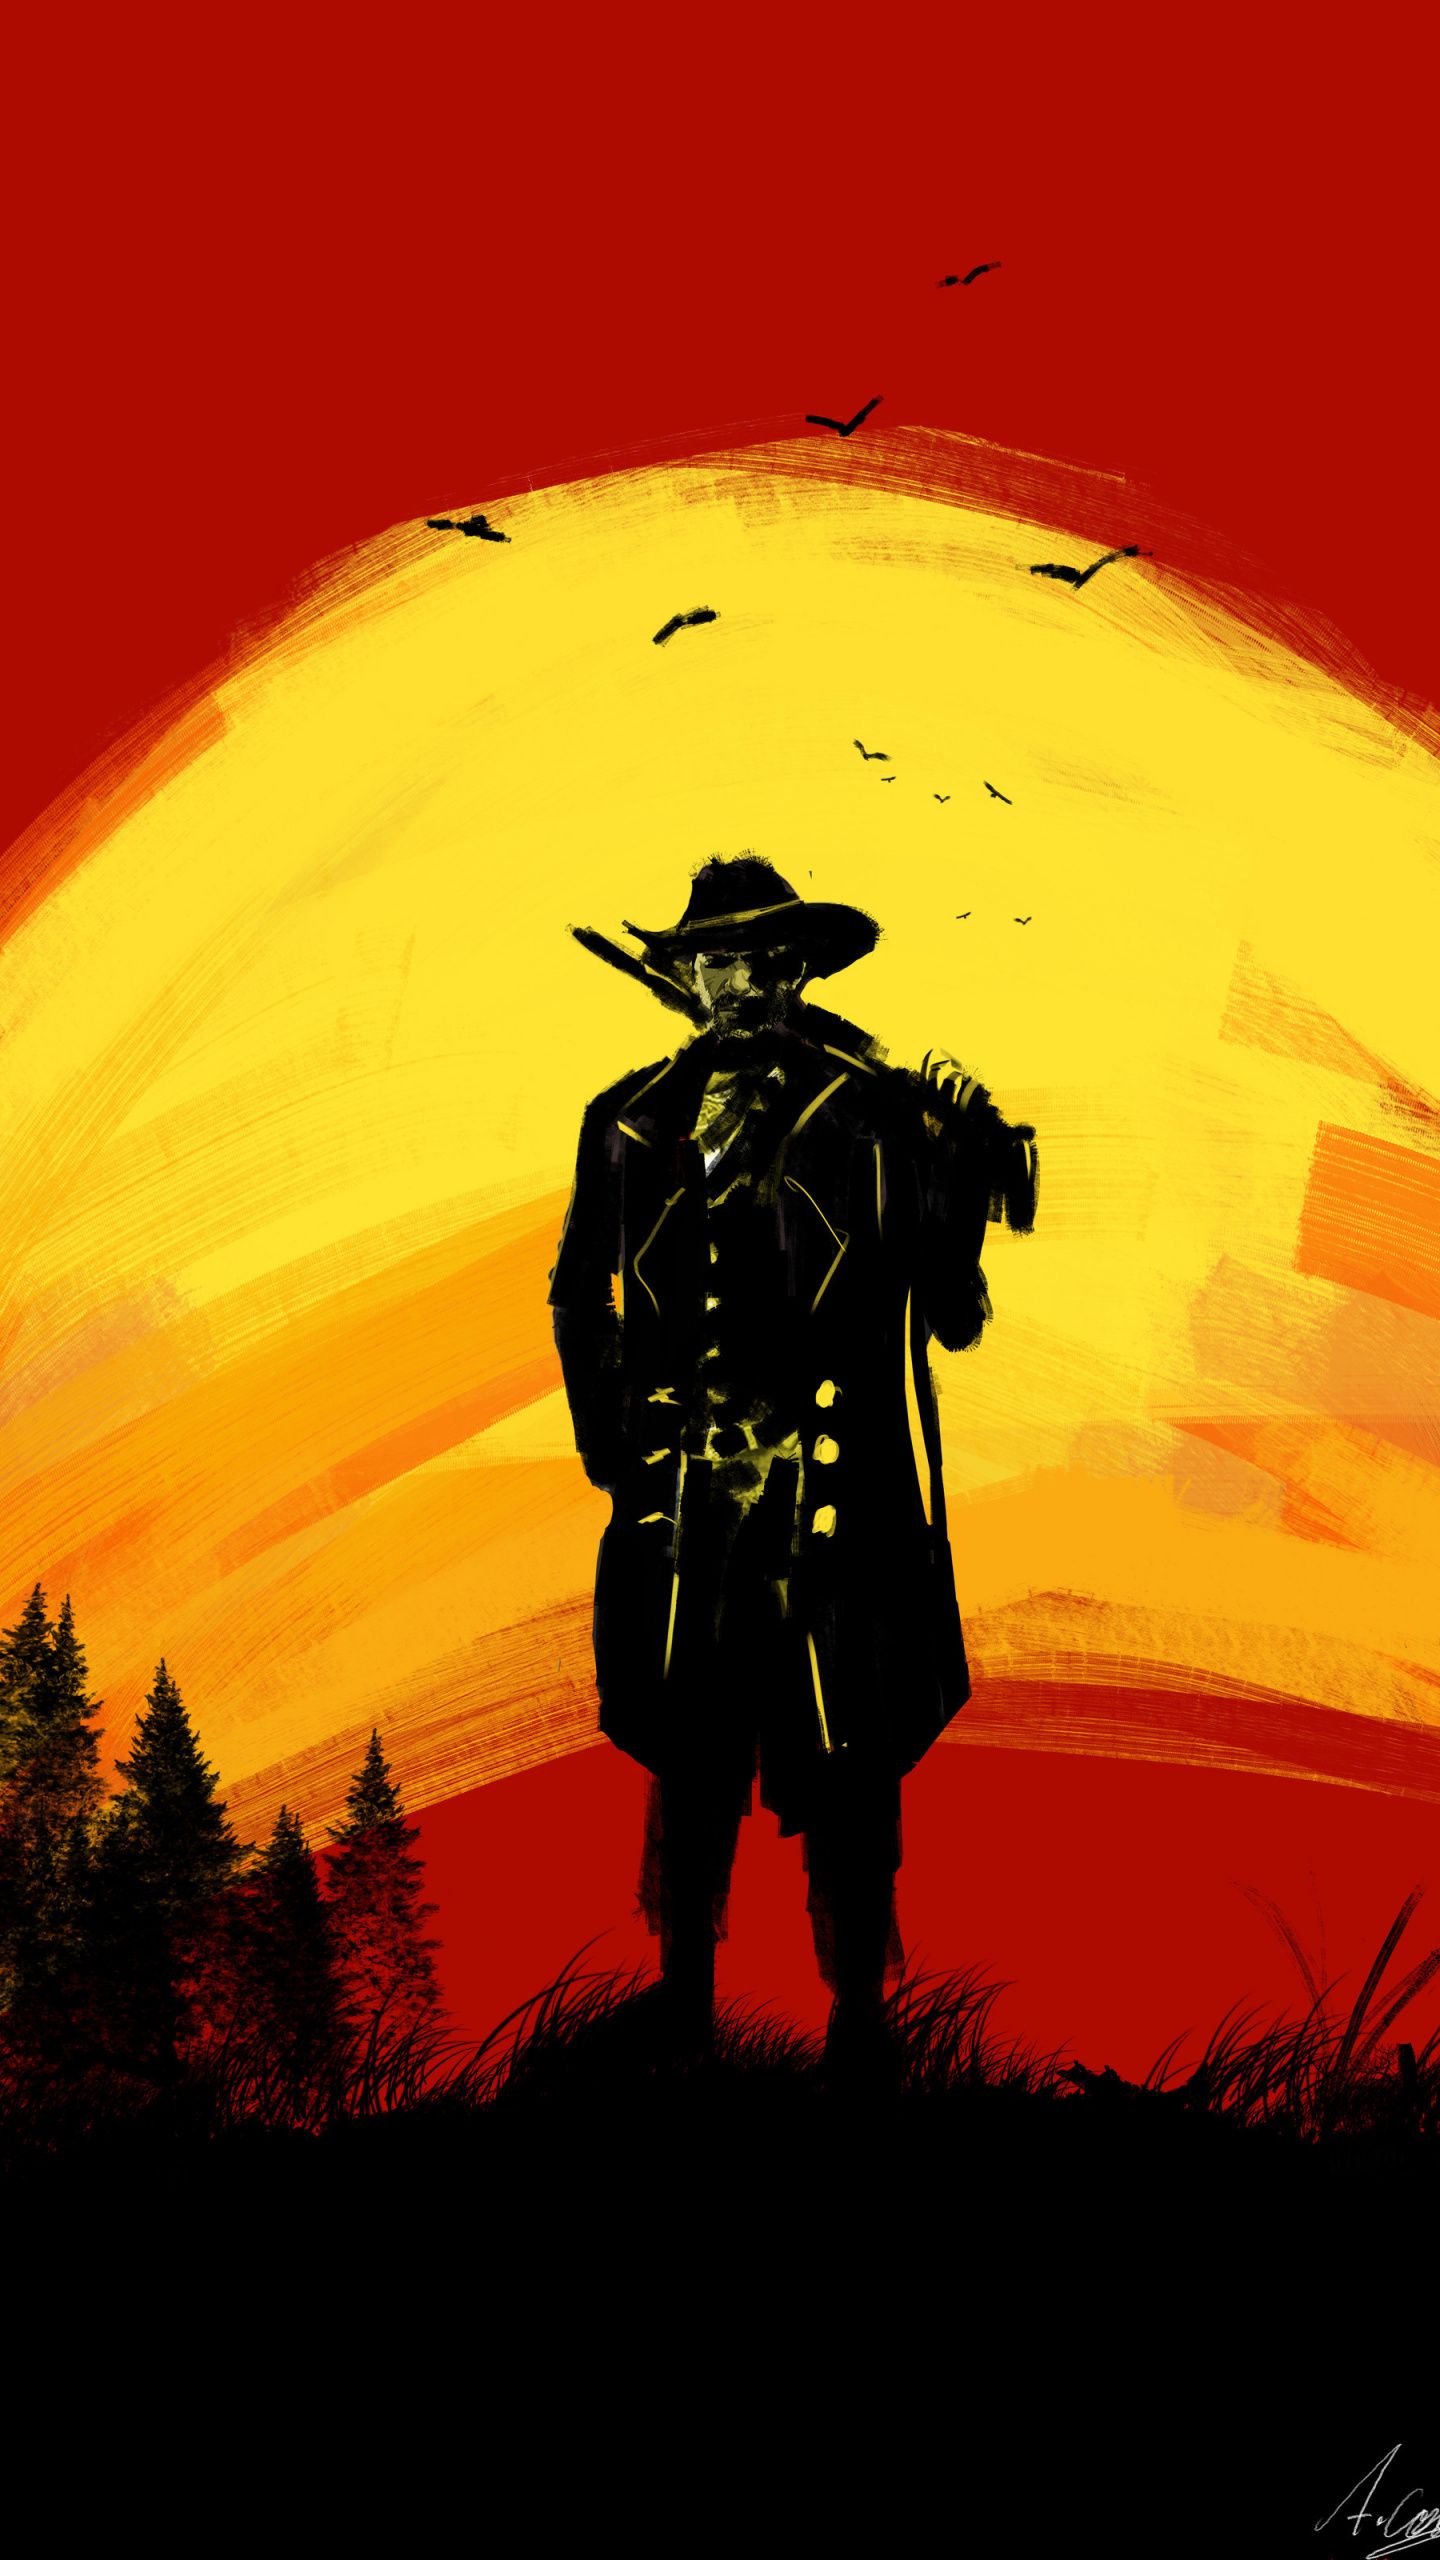 Red Dead Redemption 2 Wallpapers